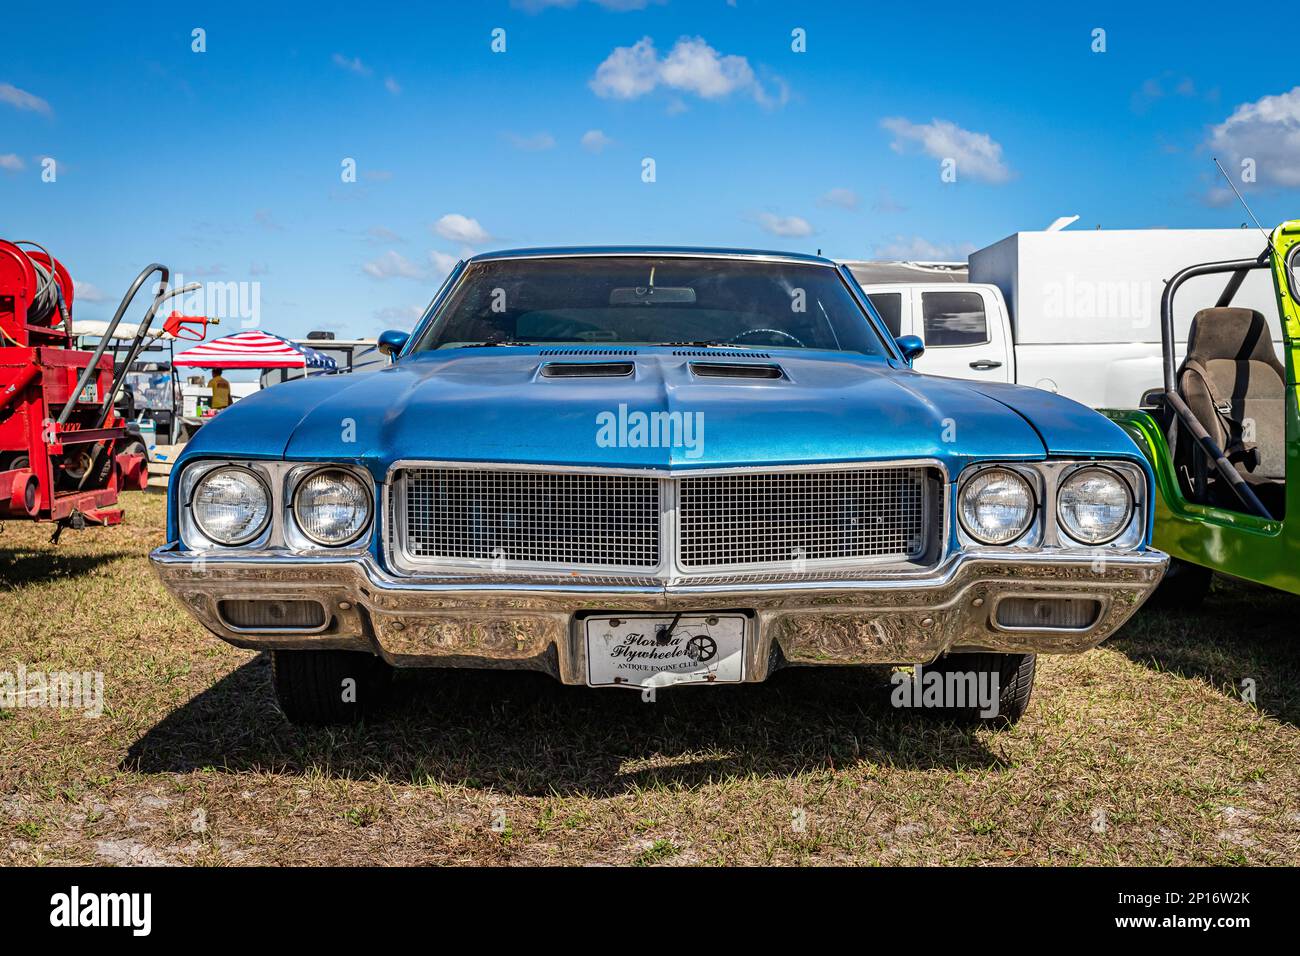 Fort Meade, FL - February 24, 2022: Low perspective front view of a 1970 Buick GS 455 Stage 1 Coupe at a local car show. Stock Photo